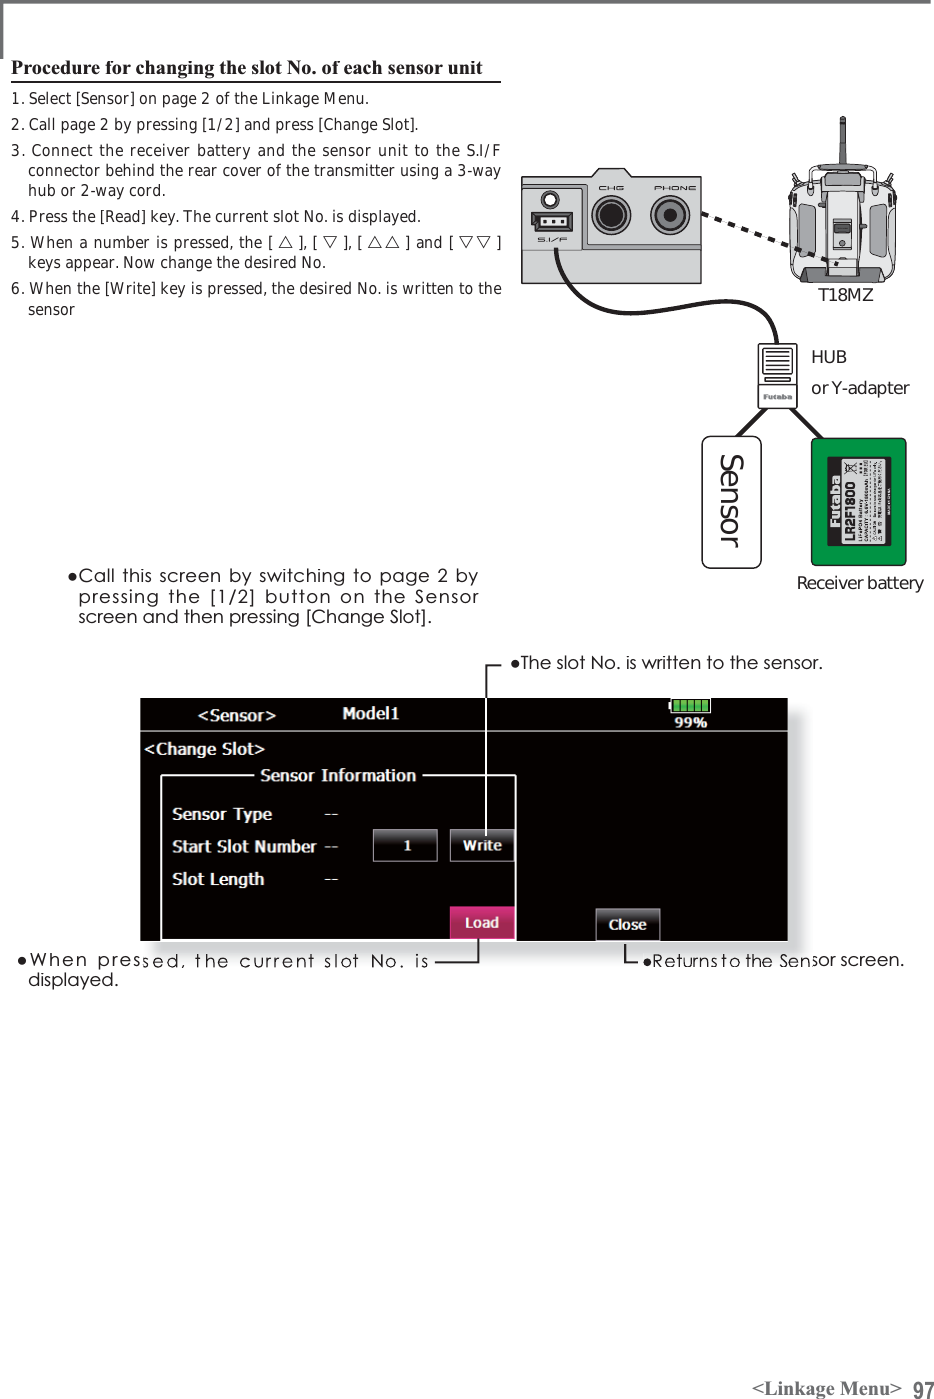 97&lt;Linkage Menu&gt;Procedure for changing the slot No. of each sensor unit1. Select [Sensor] on page 2 of the Linkage Menu.2. Call page 2 by pressing [1/2] and press [Change Slot].3. Connect the receiver battery and the sensor unit to the S.I/F connector behind the rear cover of the transmitter using a 3-way hub or 2-way cord.4. Press the [Read] key. The current slot No. is displayed.5. When a number is pressed, the [ 䂦], [ 䂰], [ 䂦䂦 ] and [ 䂰䂰 ] keys appear. Now change the desired No.6. When the [Write] key is pressed, the desired No. is written to the sensorŏ&amp;DOOWKLVVFUHHQE\VZLWFKLQJWRSDJHE\SUHVVLQJWKH&gt;@EXWWRQRQWKH6HQVRUVFUHHQDQGWKHQSUHVVLQJ&gt;&amp;KDQJH6ORW@ŏ:KHQSUHVVHGWKHFXUUHQWVORW1RLVGLVSOD\HGŏ7KHVORW1RLVZULWWHQWRWKHVHQVRUVRUVFUHHQSensorHUBor Y-adapterReceiver batteryT18MZ